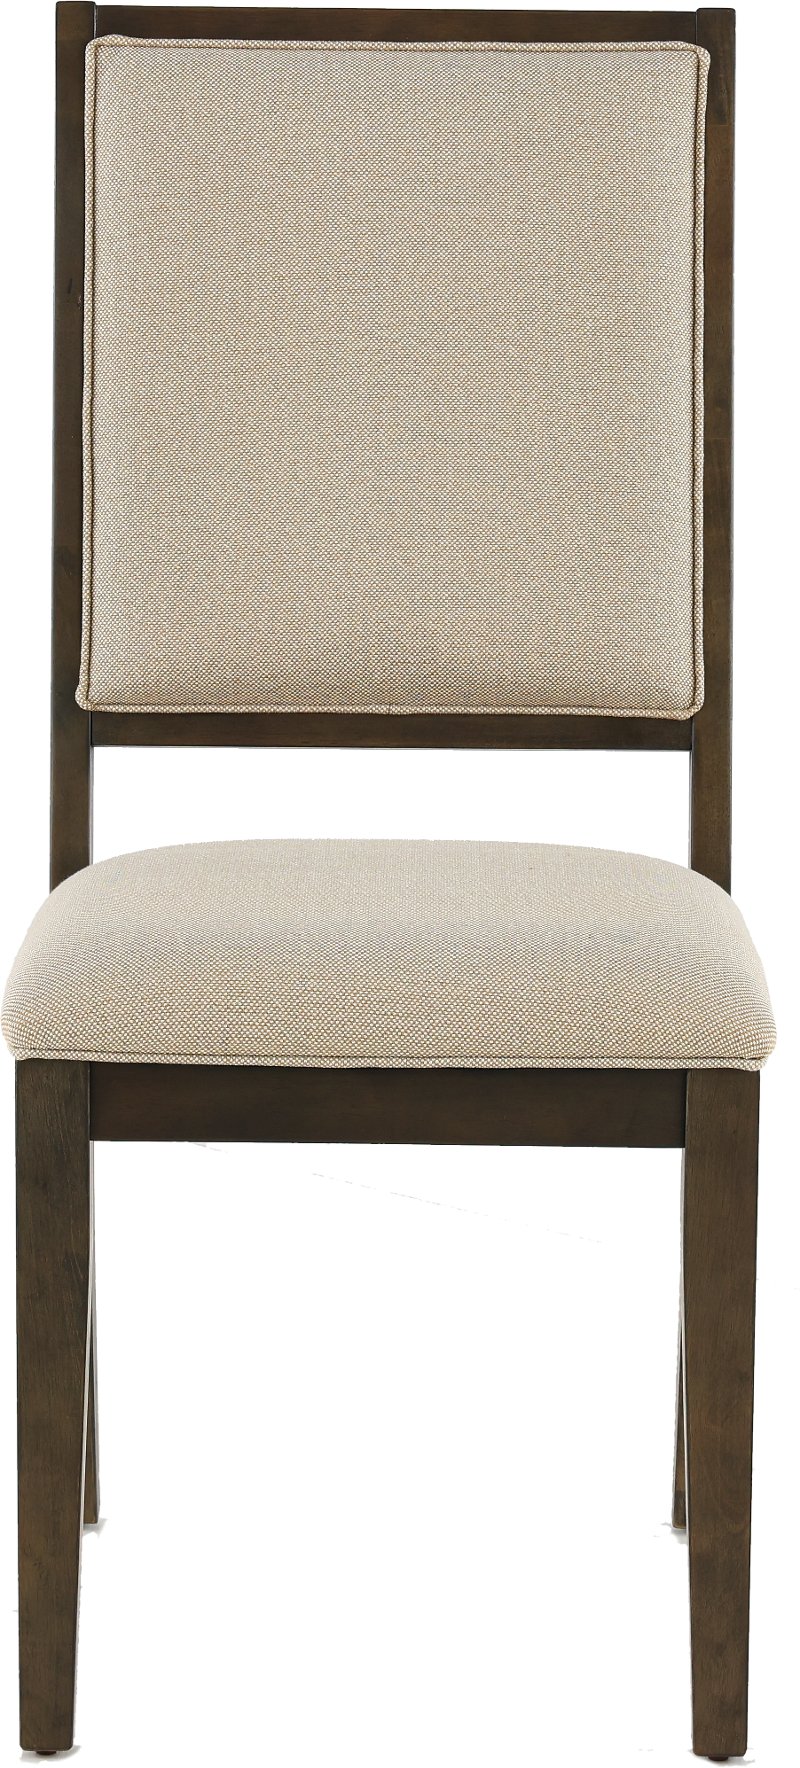 Gray Contemporary Upholstered Dining Chair Hartford Rc Willey Furniture Store